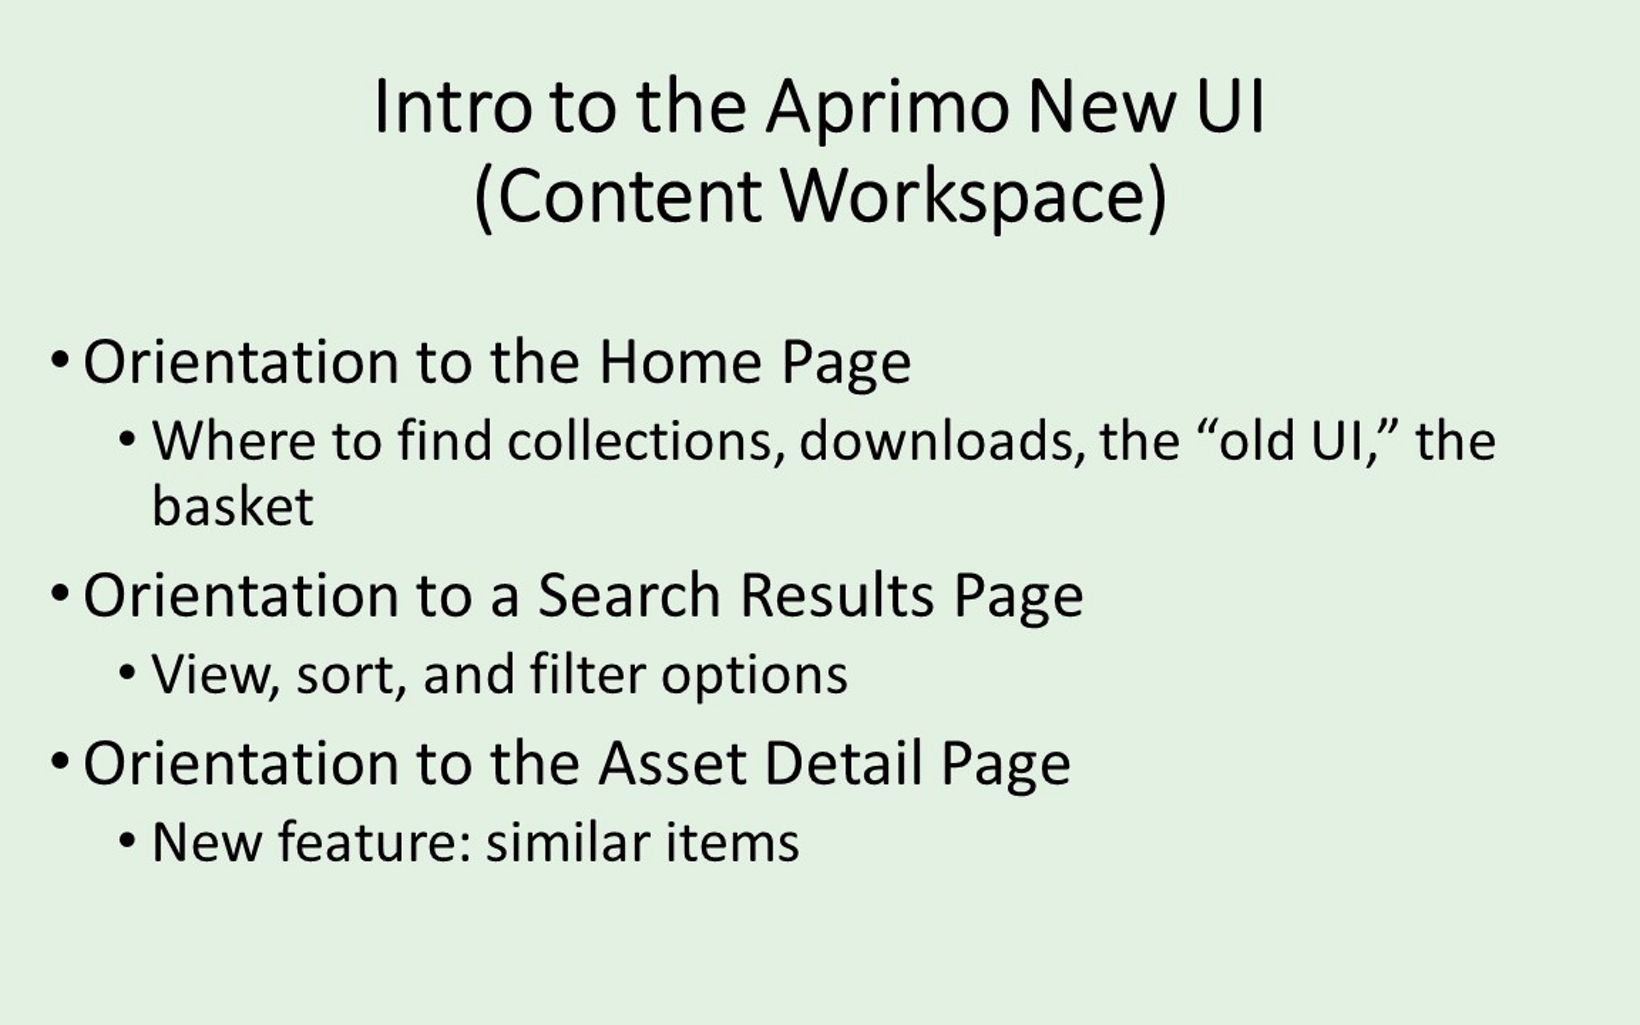 agenda for intro to new UI video